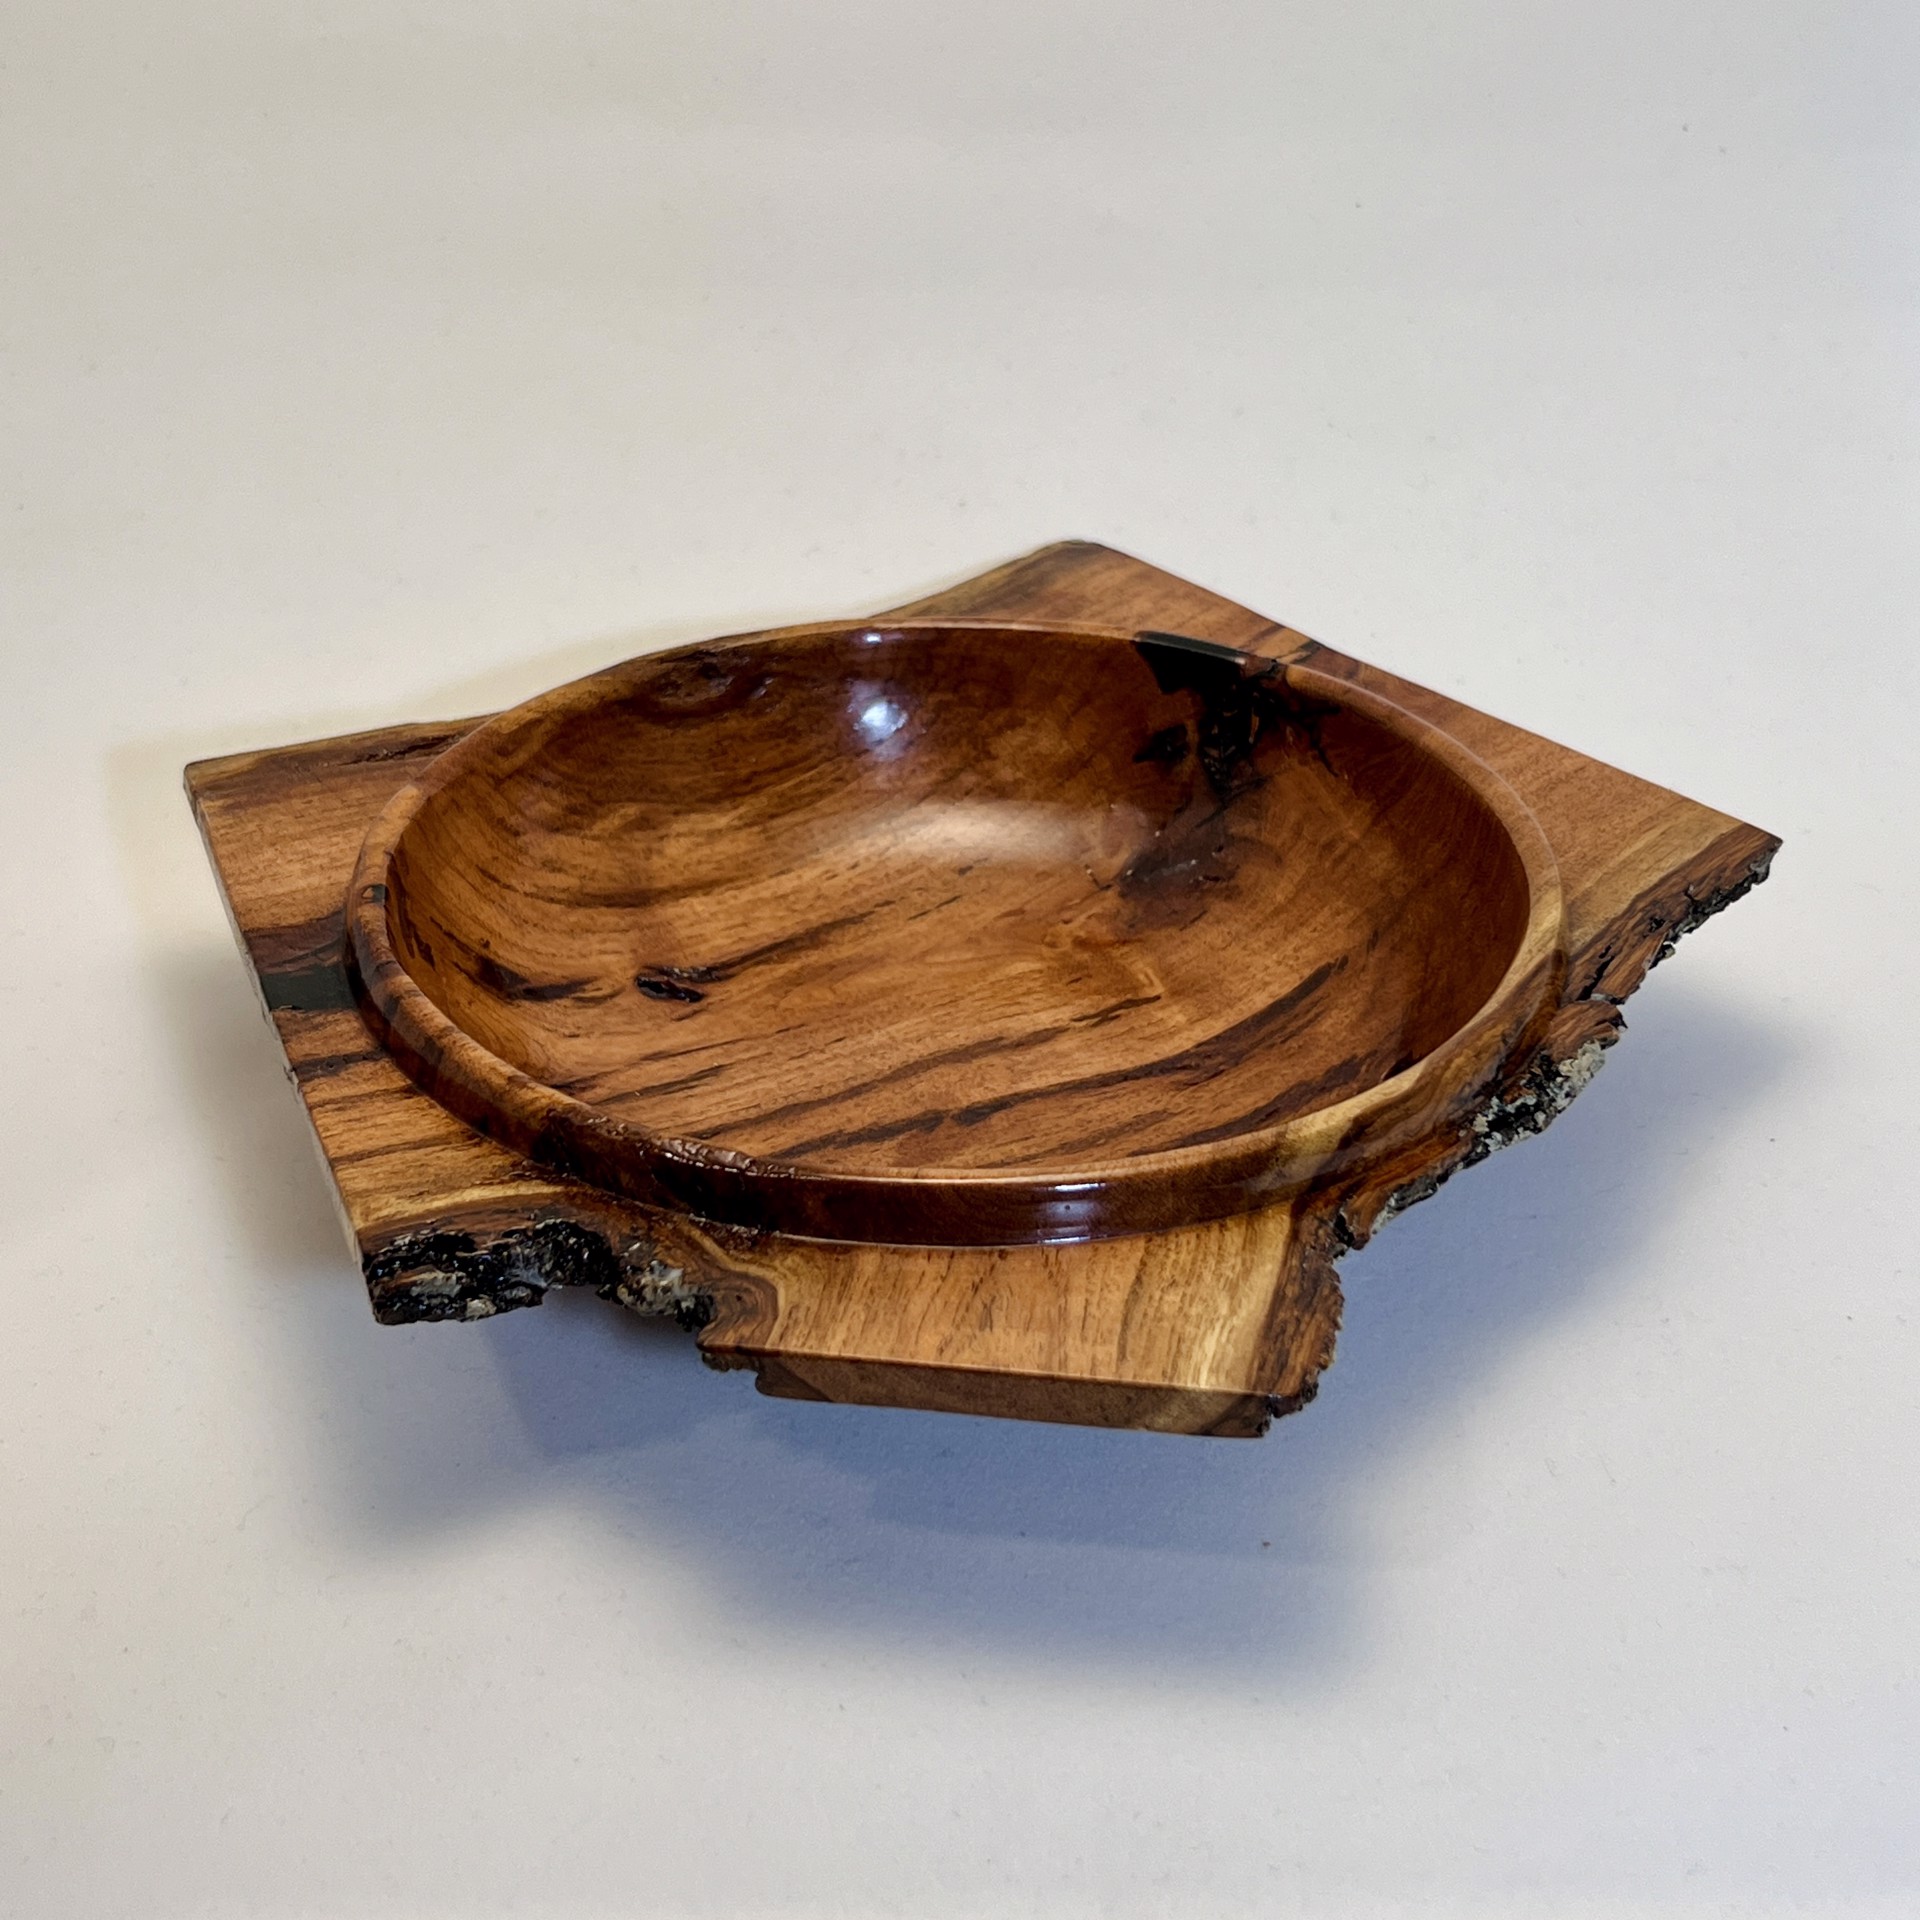 37. Mesquite Crouch Bowl by Don Kaiser